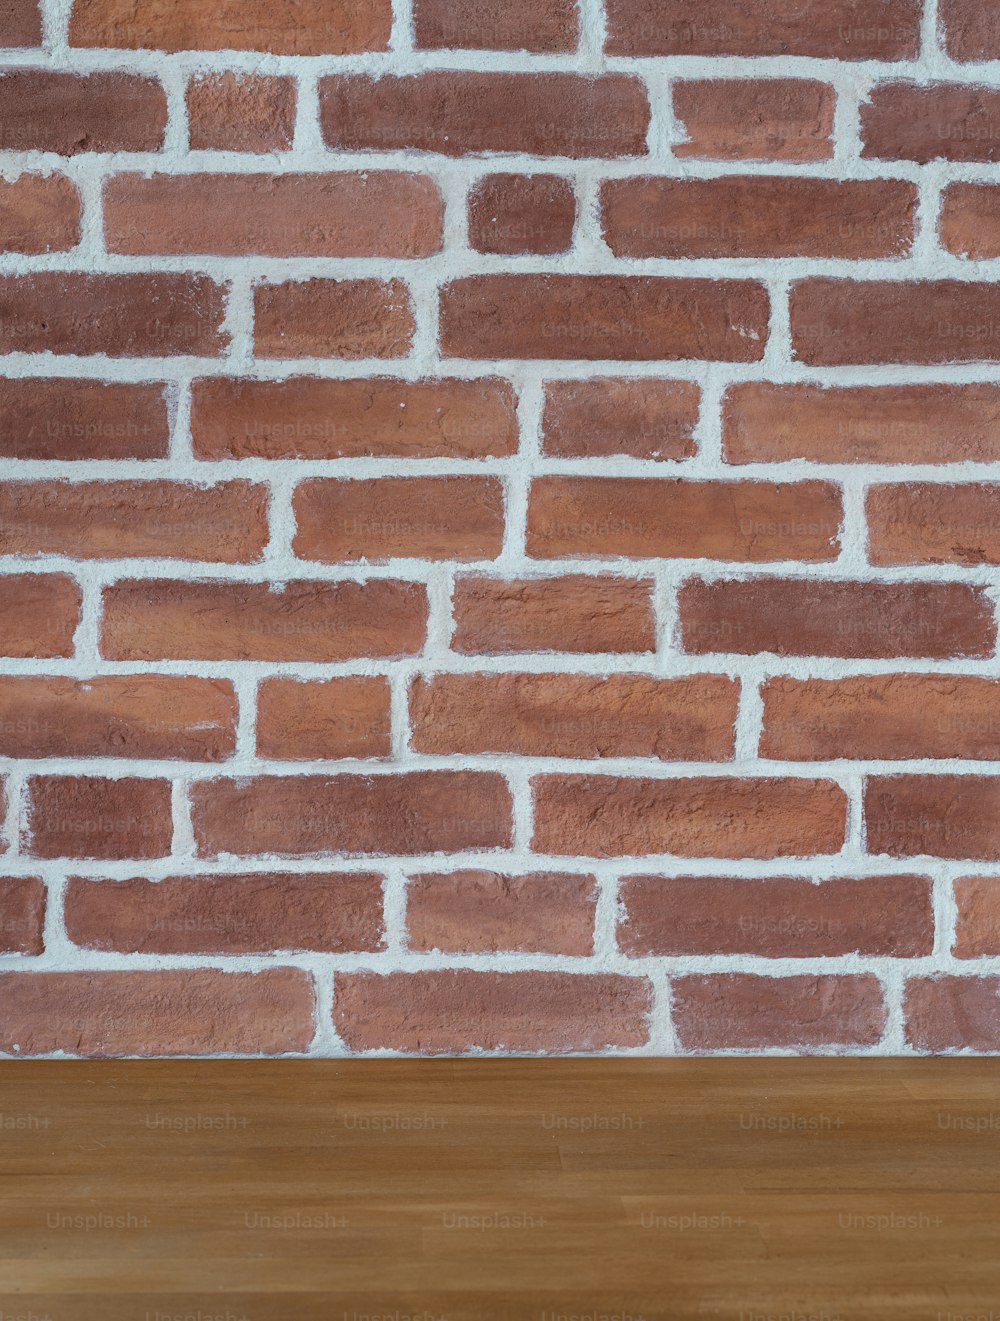 30,000+ Red Brick Wall Pictures  Download Free Images on Unsplash